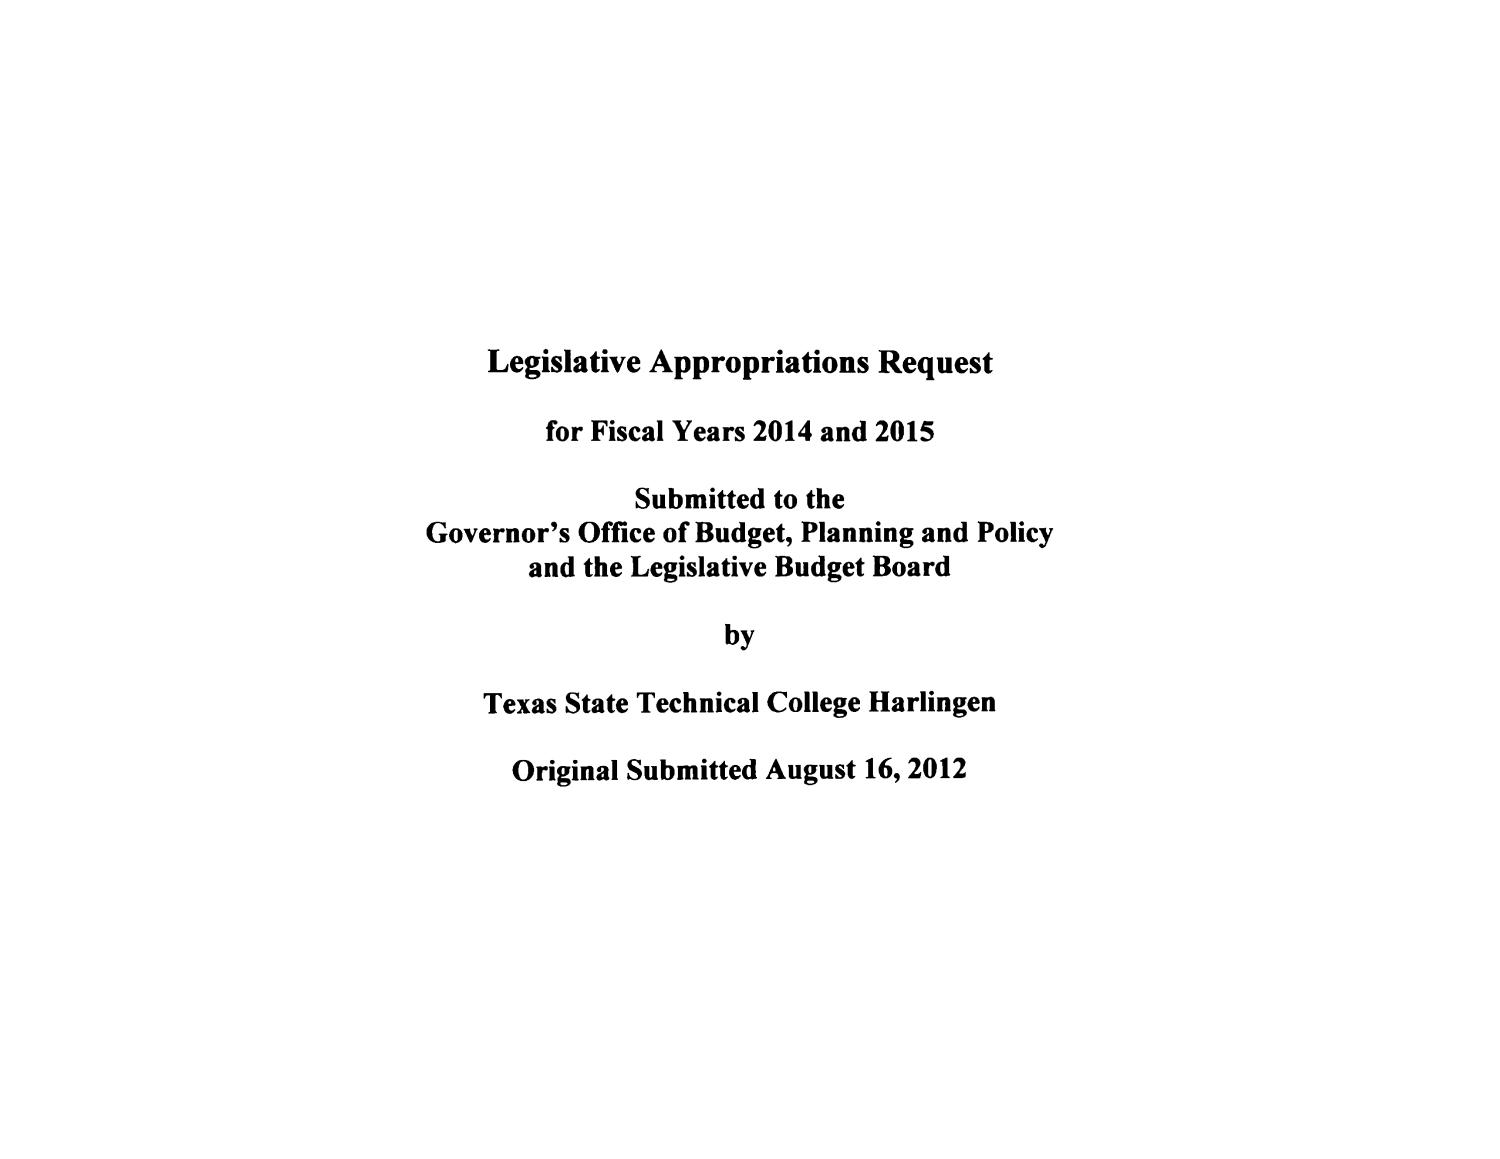 Texas State Technical College Harlingen Requests for Legislative Appropriations: 2014 and 2015
                                                
                                                    Title Page
                                                